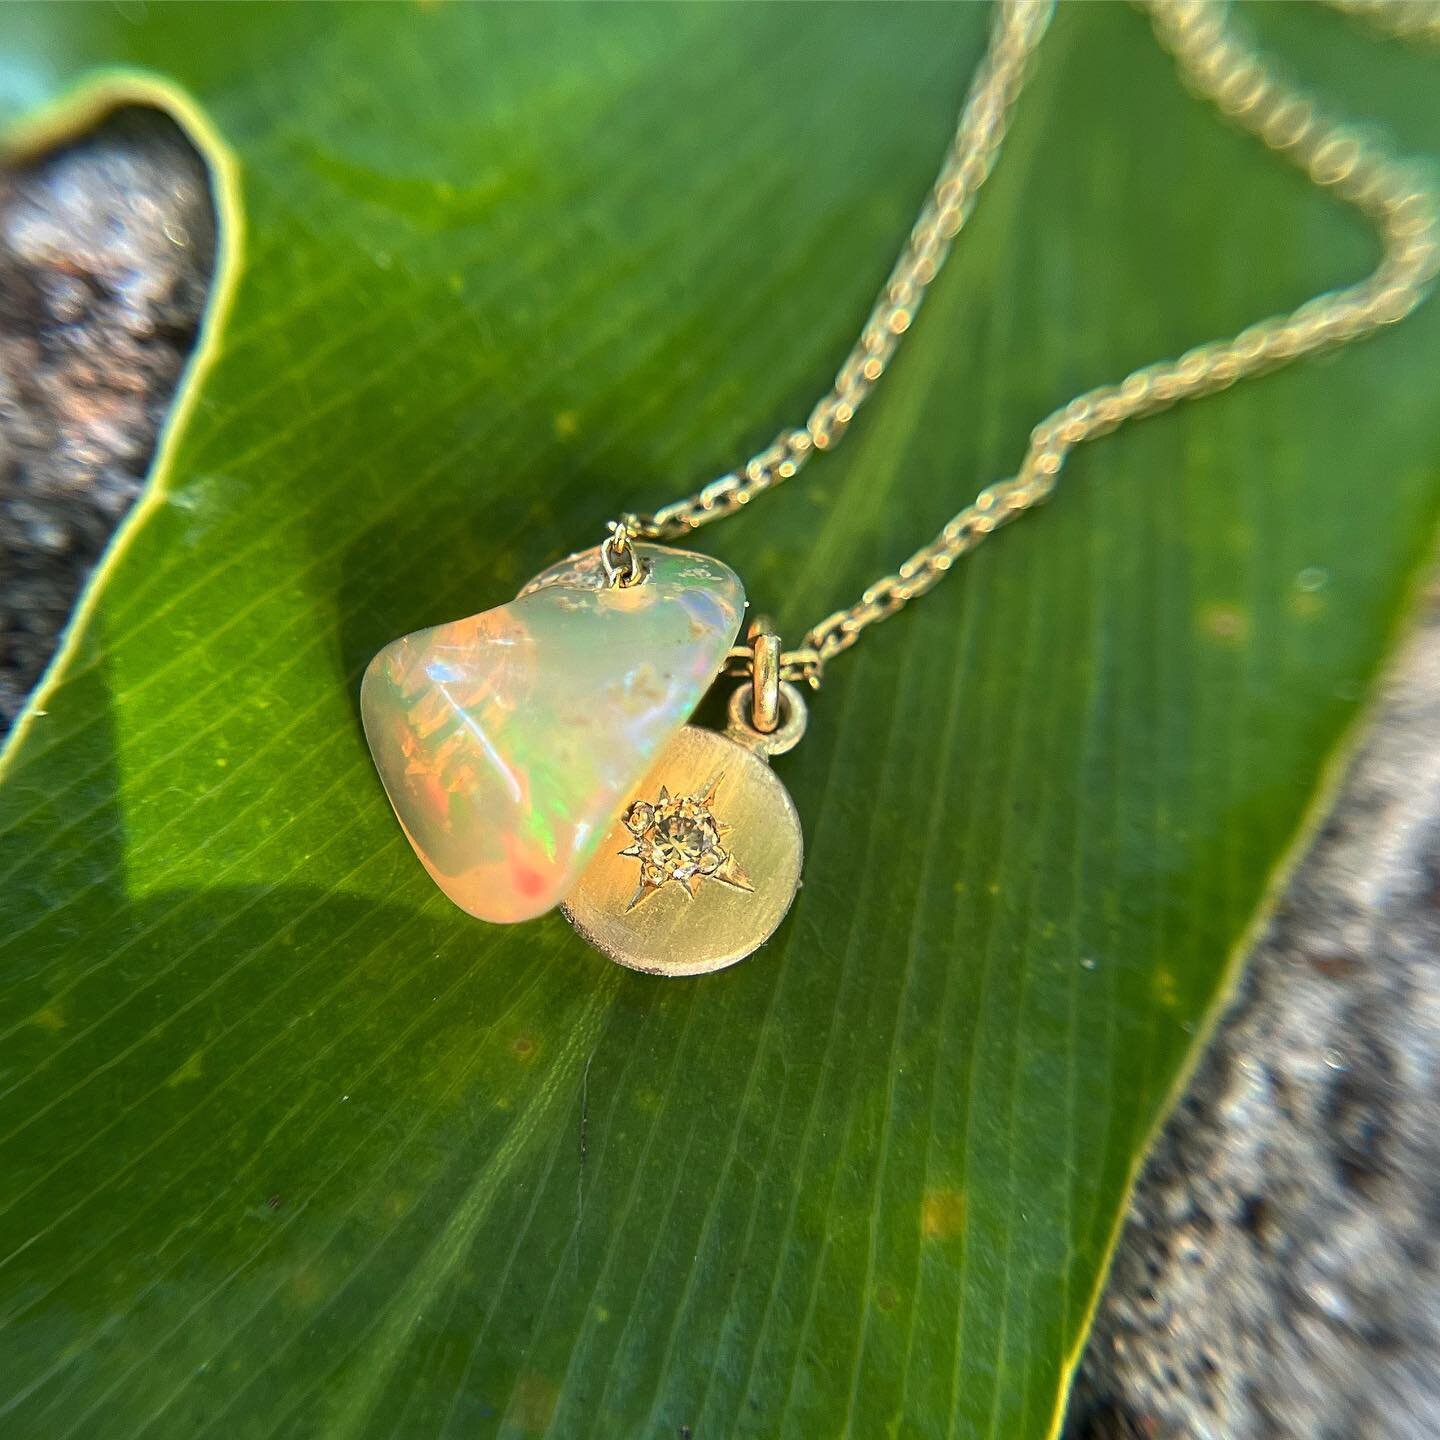 opal and gold charm necklace just listed on the site! Pure magic ✨ 🌈 🌟